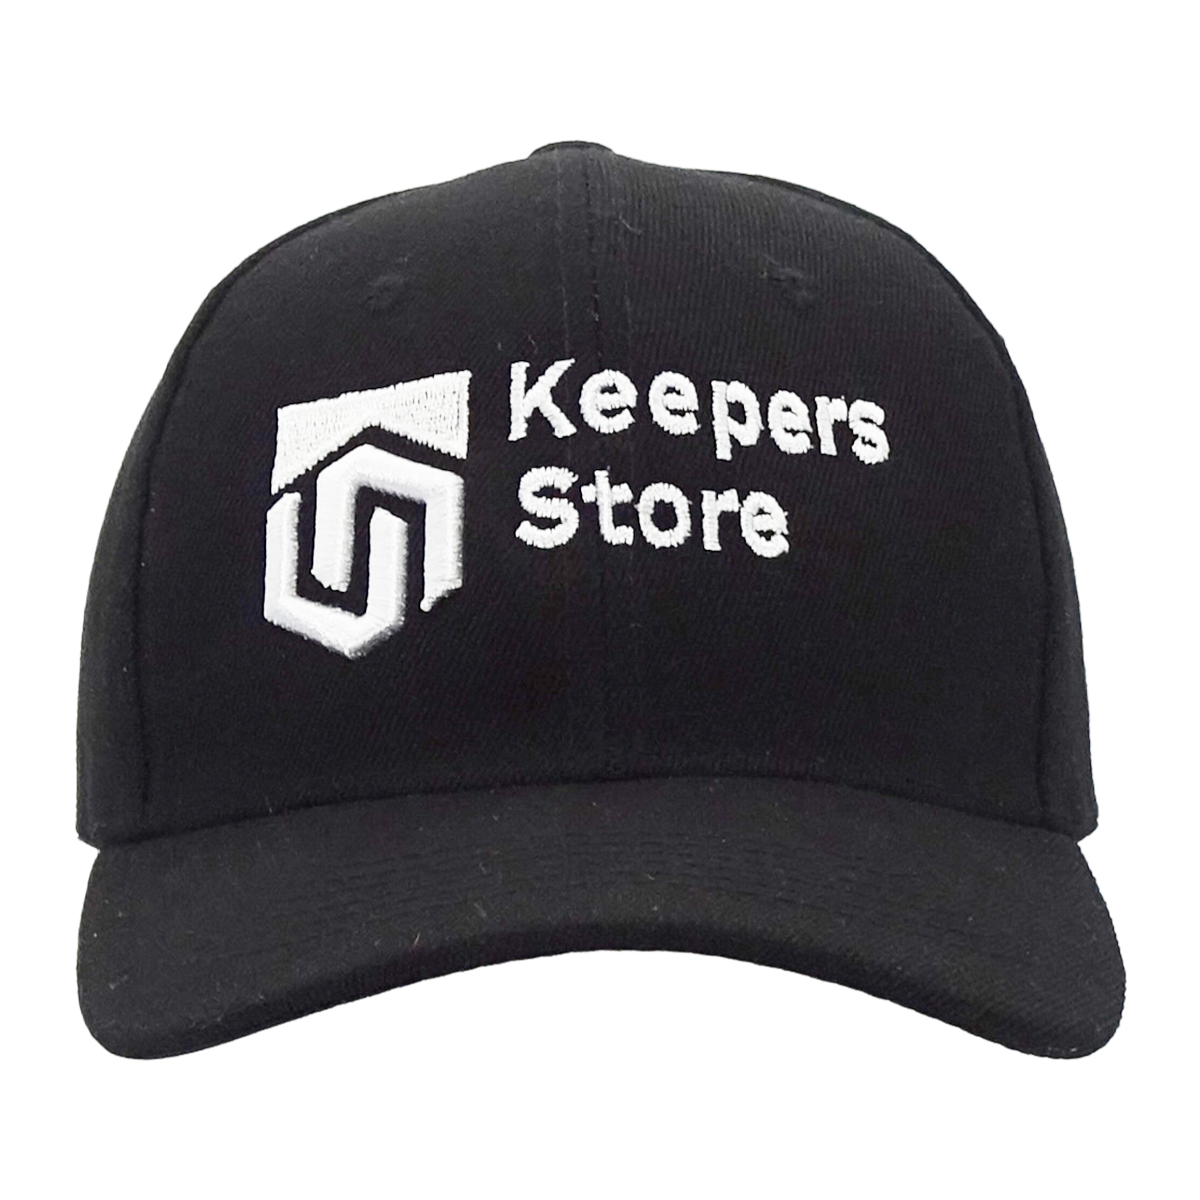 Gorra Keepers Store